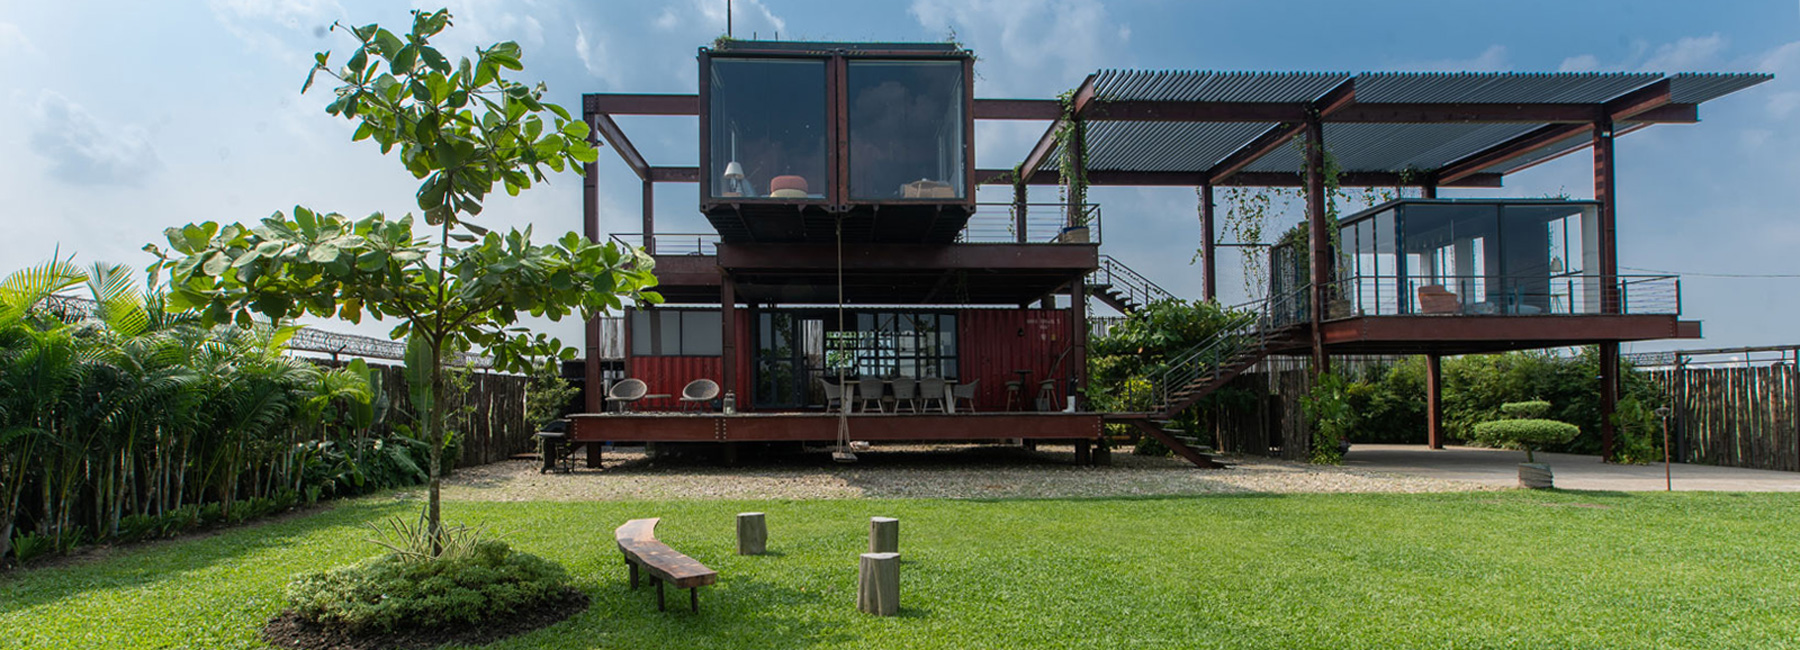 river & rain combines recycled shipping containers into three-story residence in dhaka